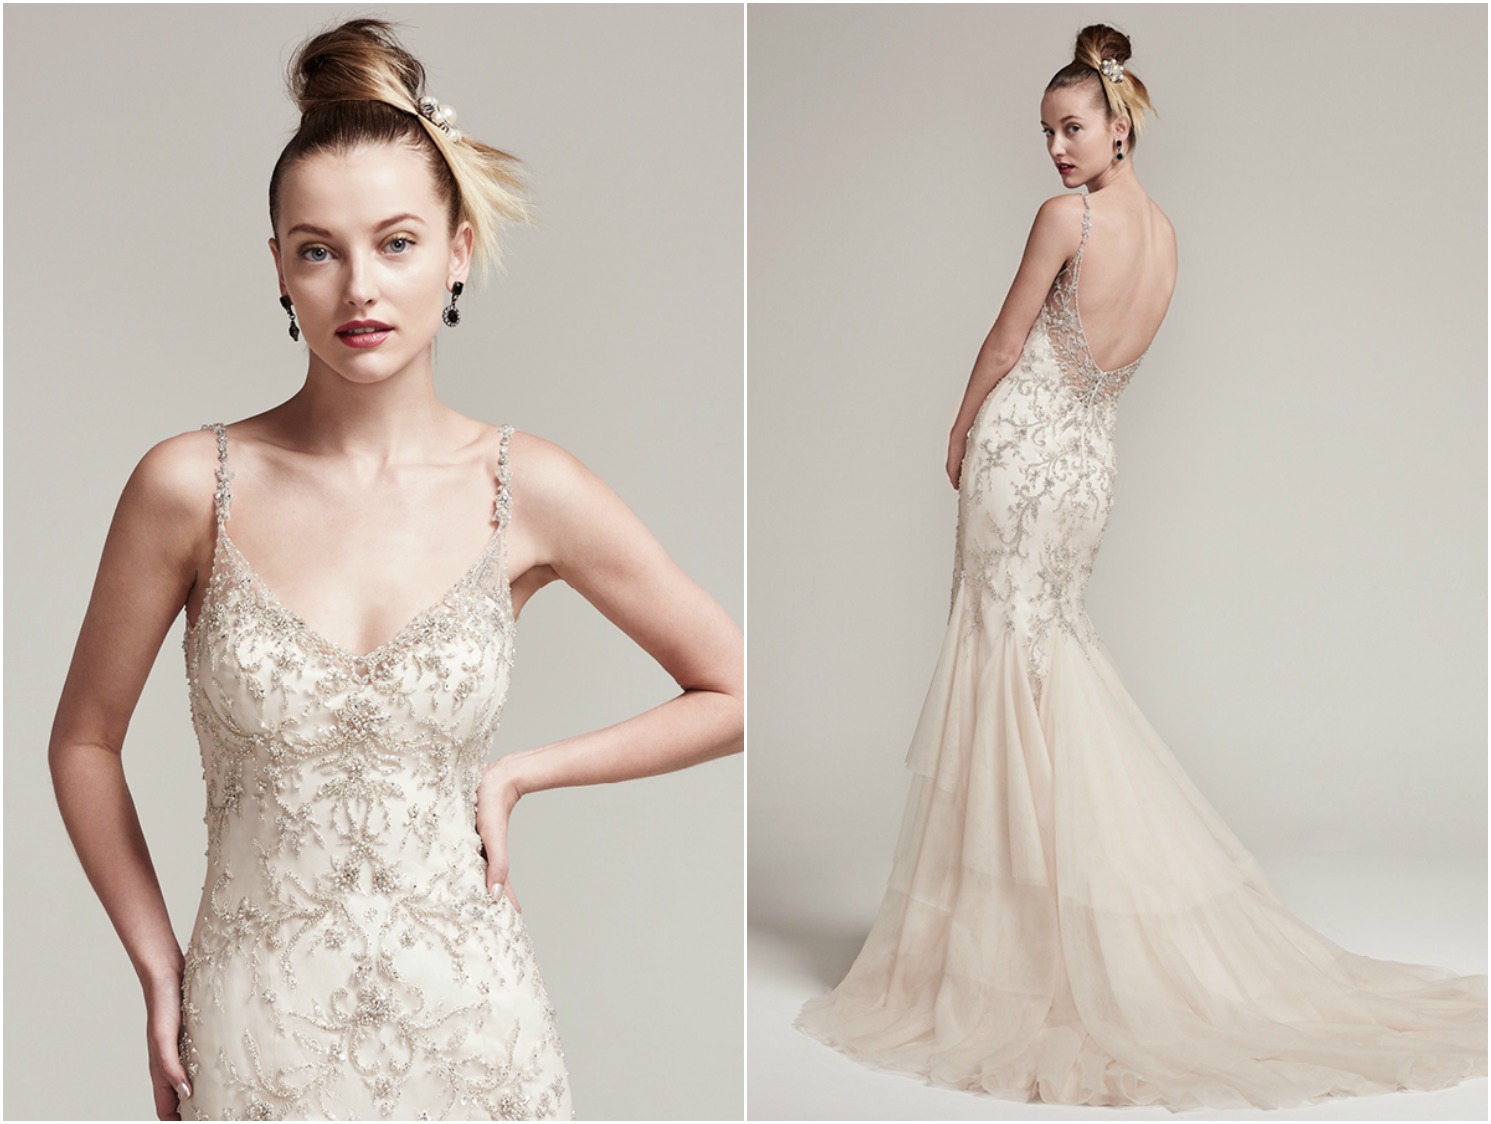 Pearls and Swarovski crystals add an extra dose of drama and dimension to this tulle fit and flare wedding dress, complete with bead encrusted spaghetti straps and V-neckline seamlessly flowing into a tiered-godet skirt. Finished with embellished illusion back and crystal buttons over zipper closure. 

<a href="https://www.maggiesottero.com/sottero-and-midgley/erin/9850" target="_blank">Sottero &amp; Midgley</a>